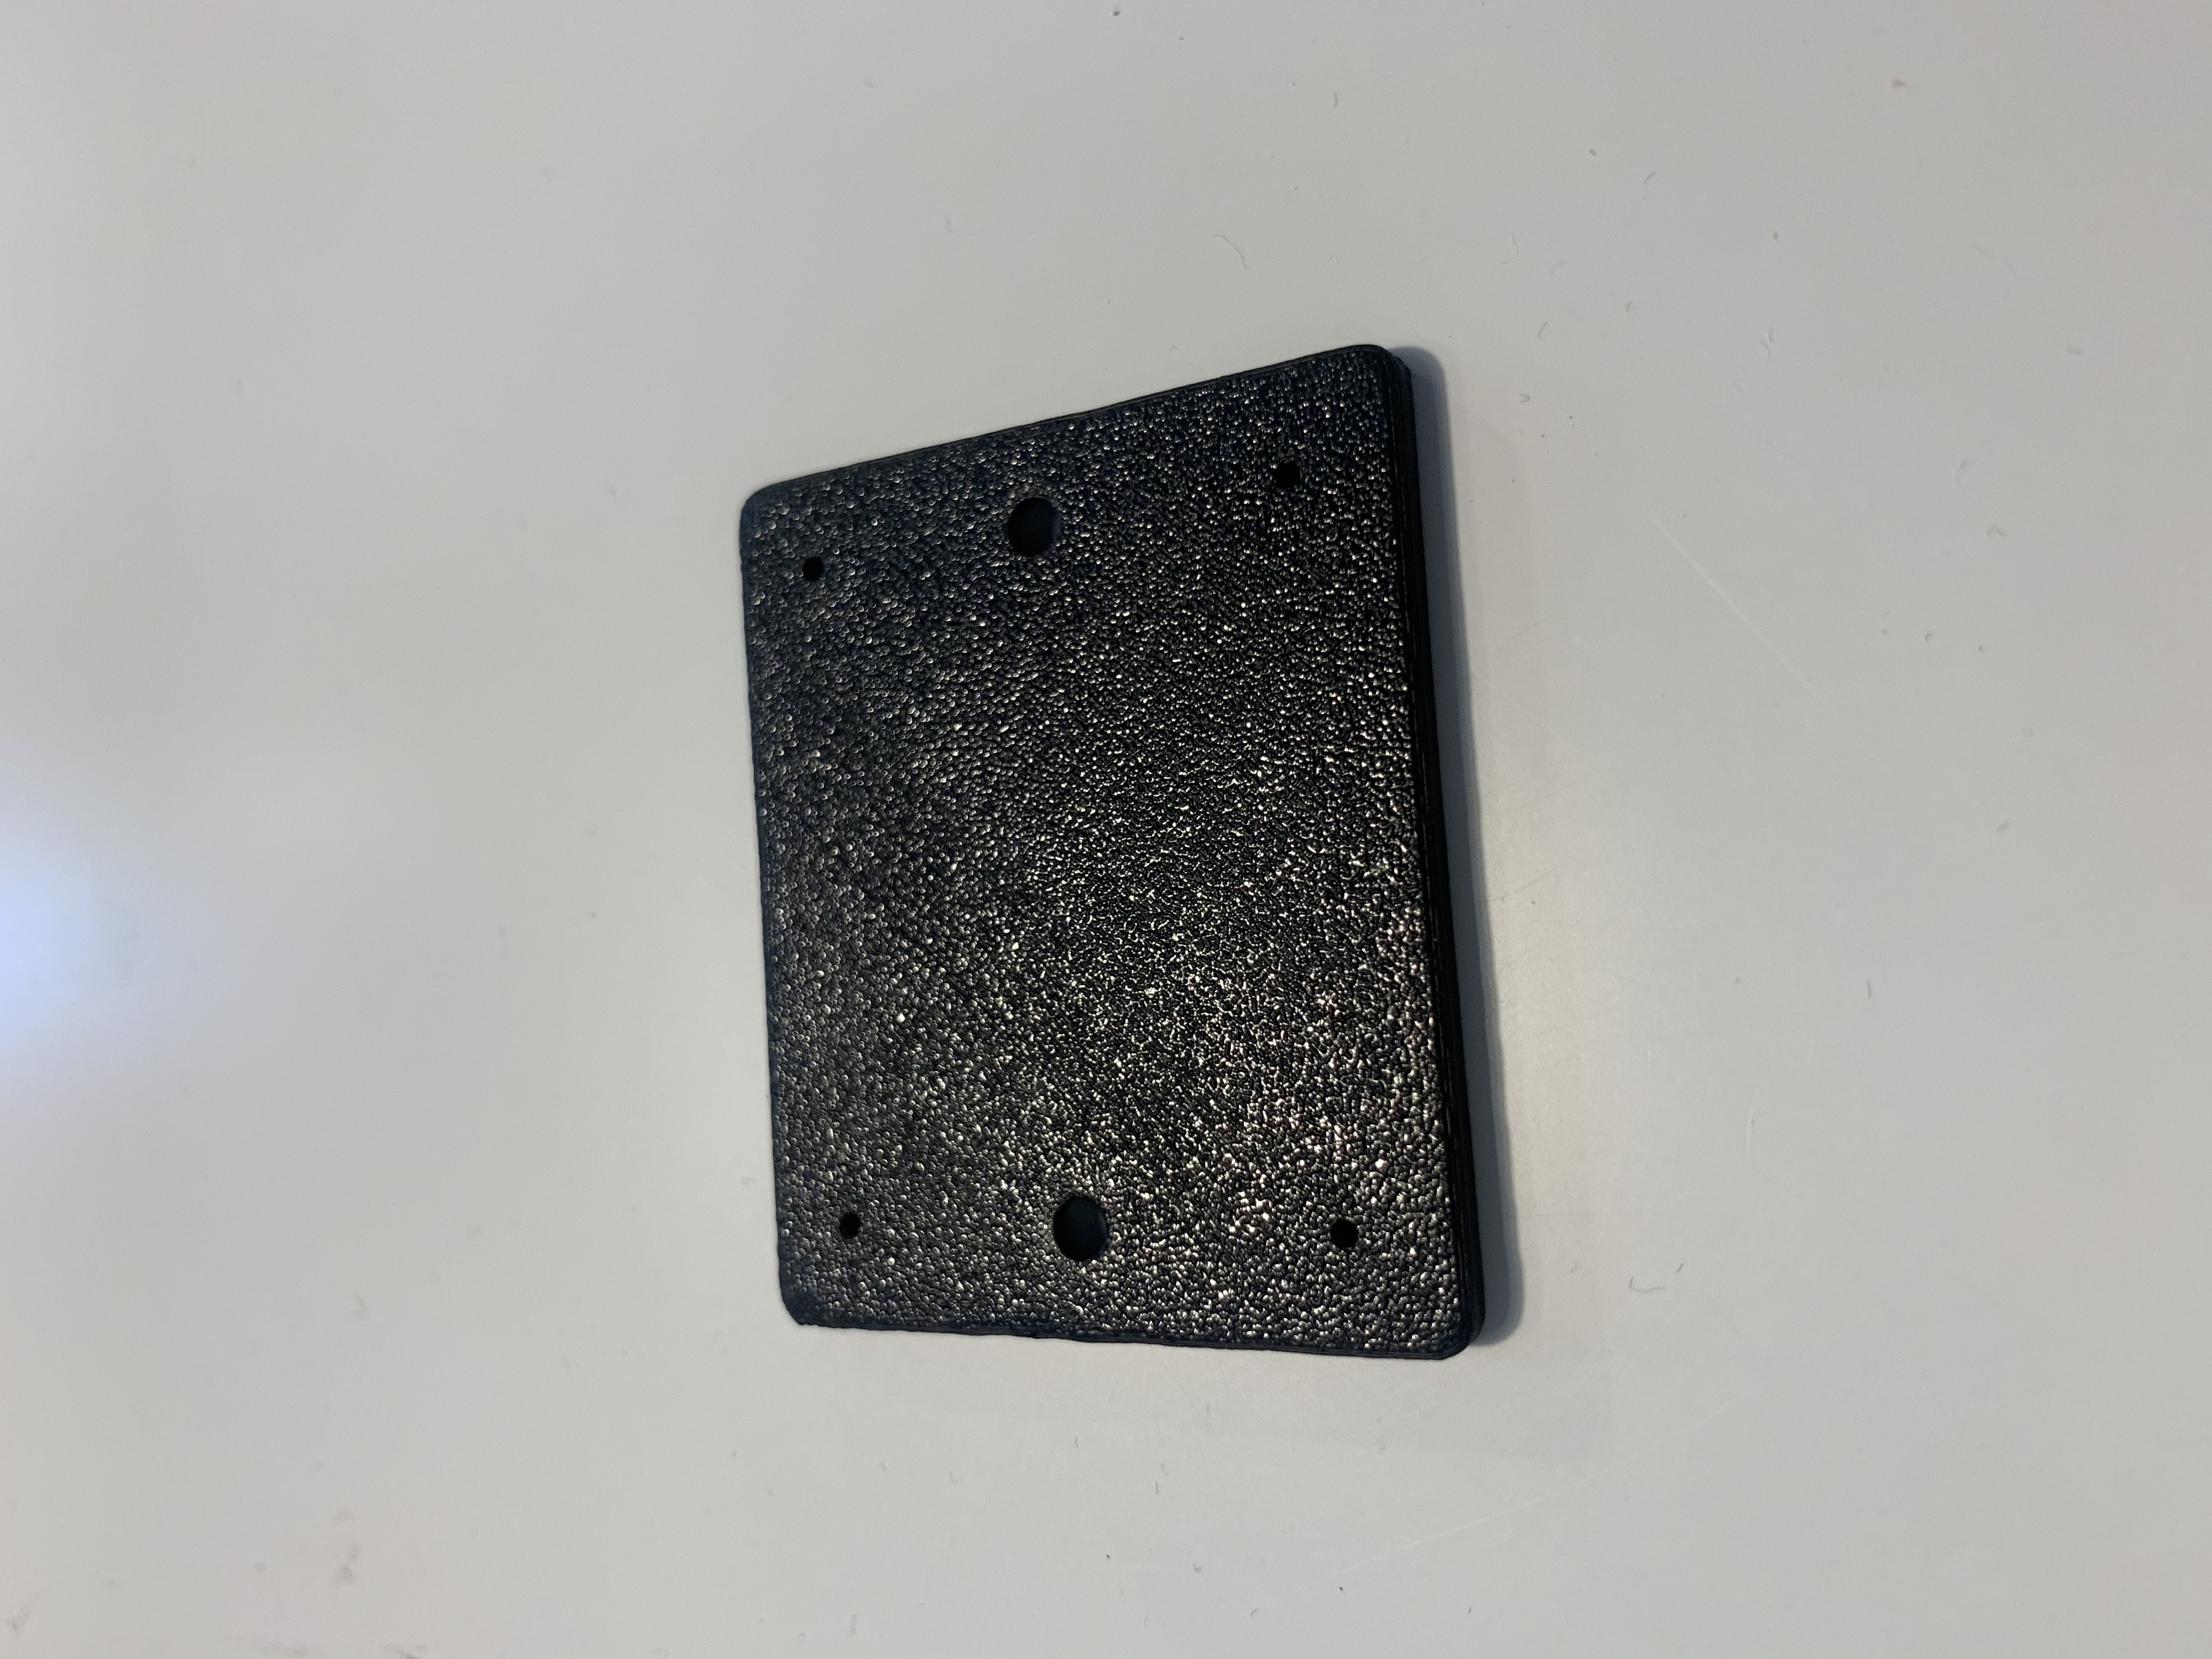 Brodit adapter plate